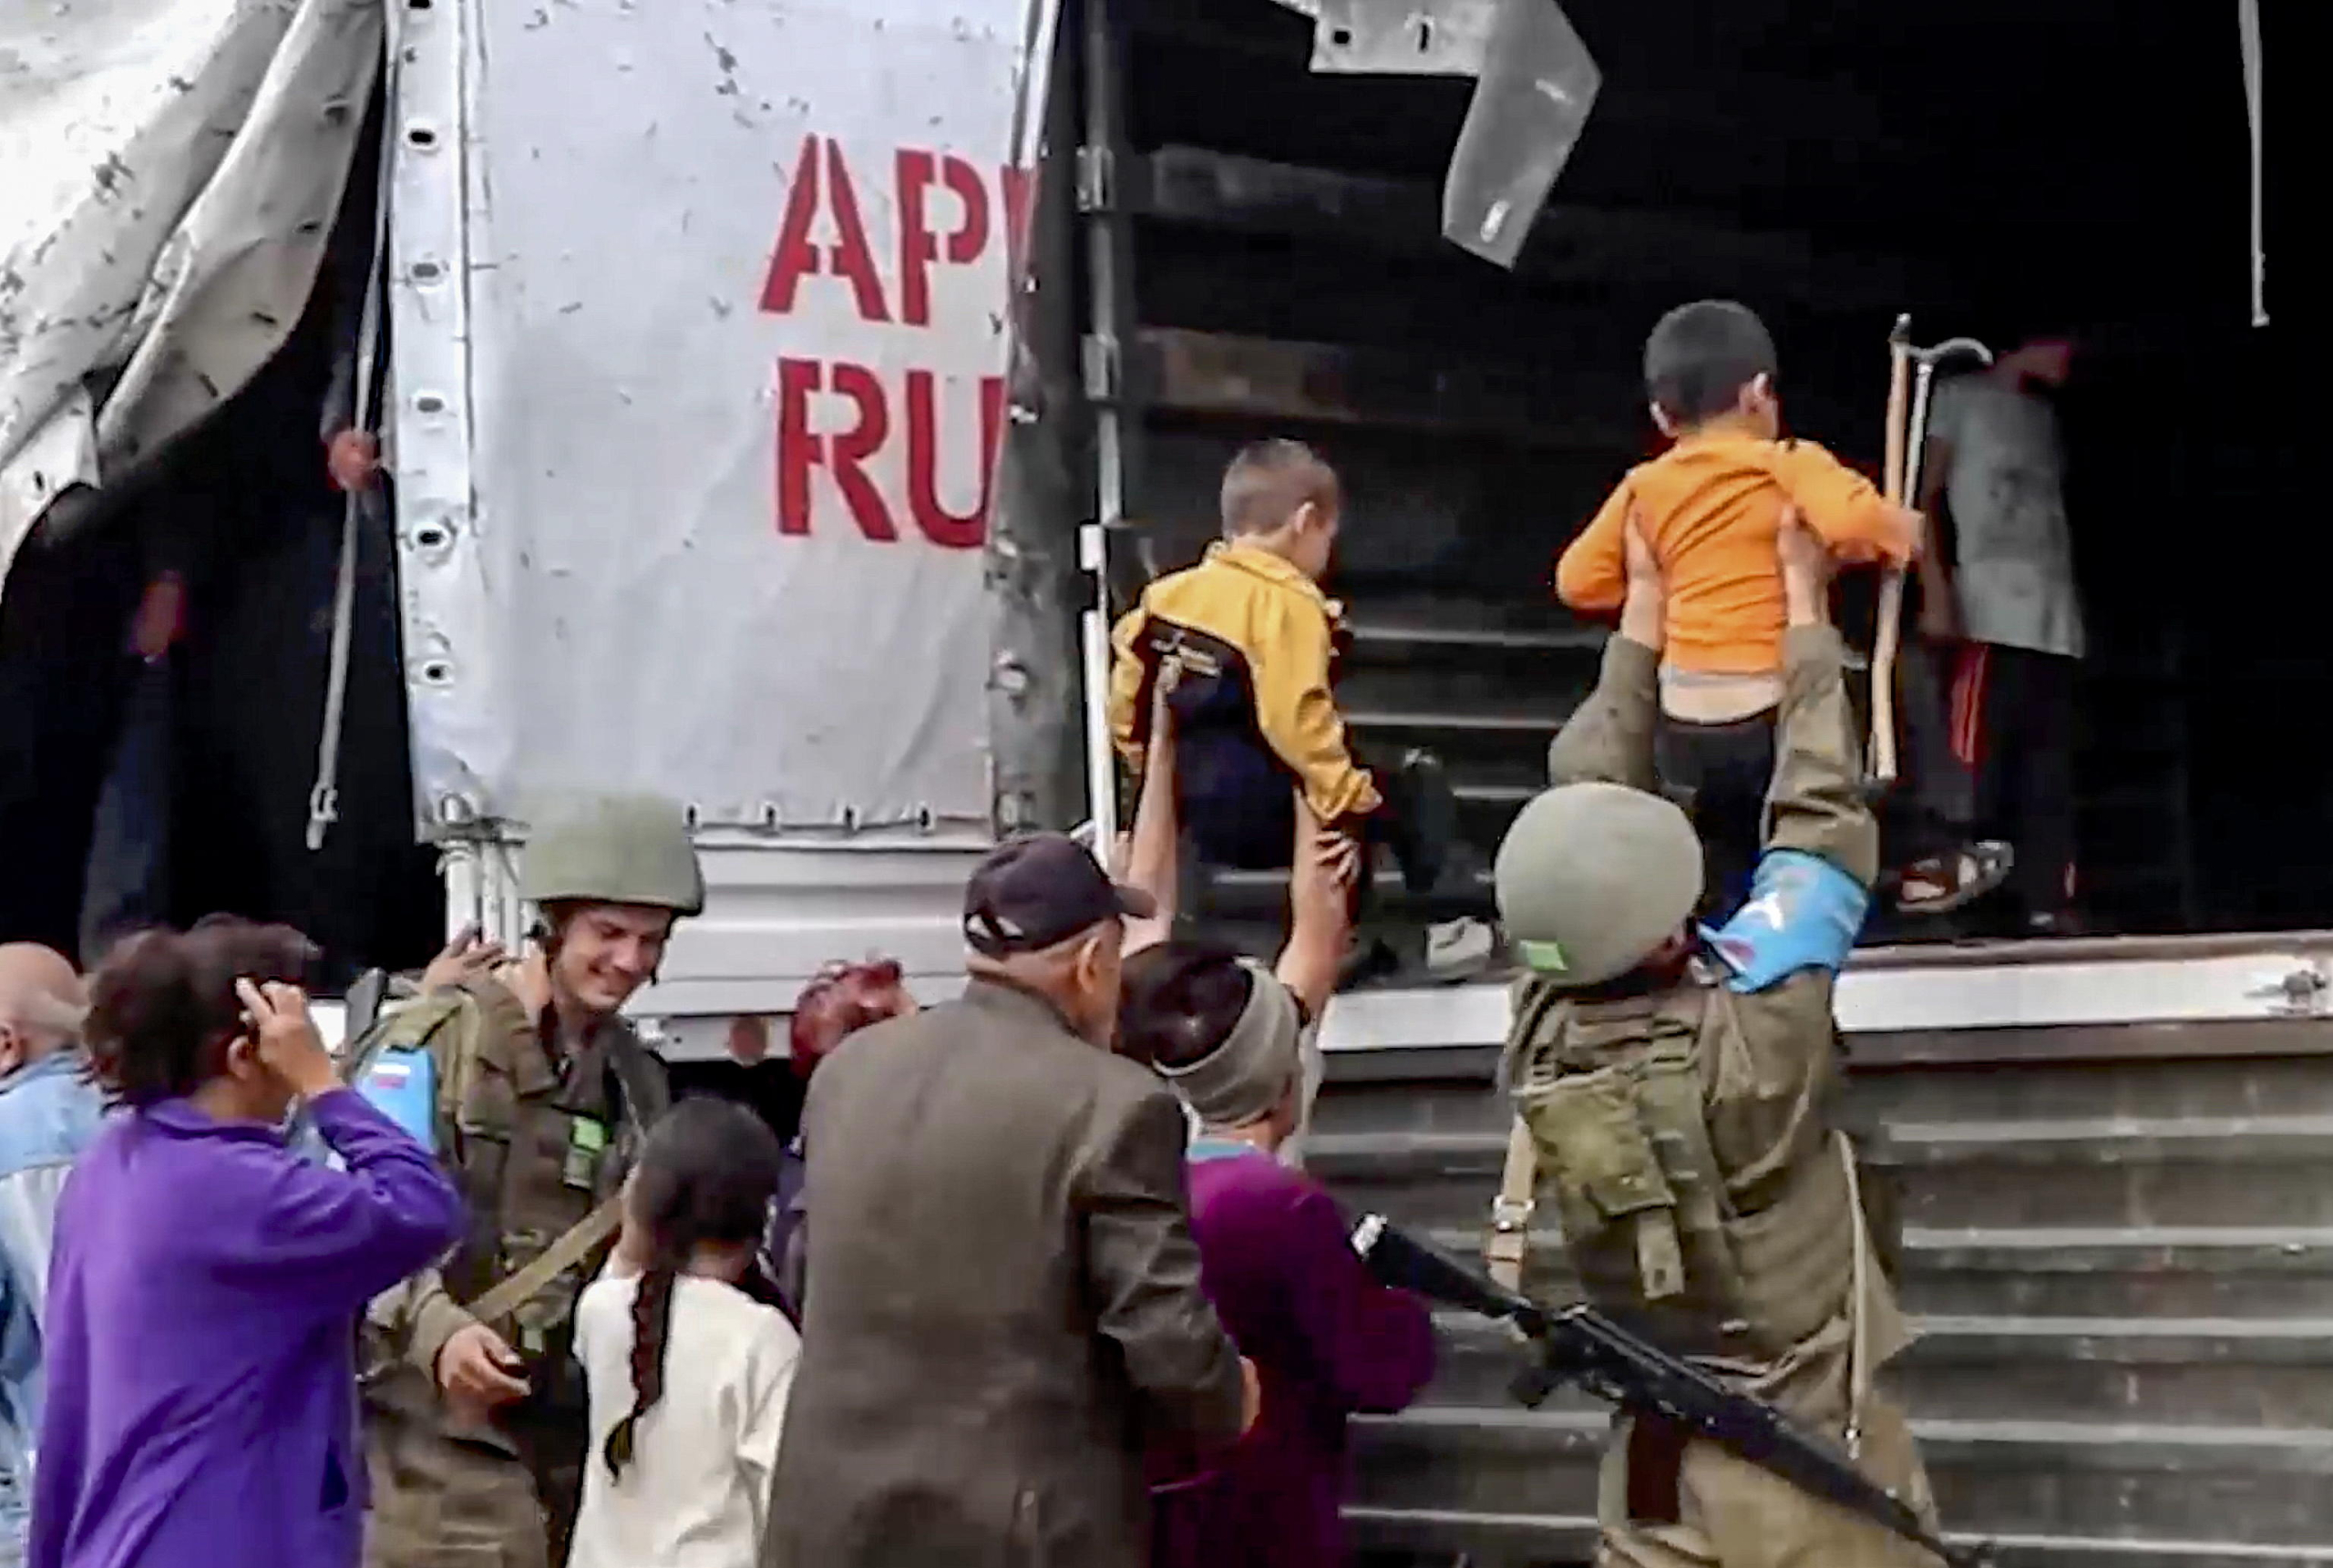 epa10882544 A still image taken from a handout video provided by the Russian Defence Ministry press-service shows Russian peacekeepers evacuating Nagorno-Karabakh civilians at an undisclosed location, 25 September 2023. Over the past 24 hours, Russian military personnel ensured the delivery of 190 tons of cargo with food and fuel and other aid for the civilian population of Karabakh, the Russian Ministry of Defence said on 25 September. Russian peacekeepers escorted the transport of civilians from the Martuni region, delivering 70 people to Stepanakert, the ministry added. Some 715 civilians, including 402 children, have been taken to the Russian peacekeeping contingent, where they have been provided with accommodation, food and medical assistance. Azerbaijan on 19 September 2023 launched a brief military offensive on the contested region of Nagorno-Karabakh, a breakaway enclave that is home to some 120,000 ethnic Armenians. The Armenian government announced the evacuation of about 3,000 local residents from the region following the ceasefire agreed on 20 September 2023, as Azerbaijan opened all checkpoints with Armenia for the unimpeded exit of civilians from the territory of Nagorno-Karabakh. Russian peacekeepers escorted convoys of civilians from Nagorno-Karabakh leaving for Armenia, the Russian Ministry of Defense reported.  EPA/RUSSIAN DEFENCE MINISTRY PRESS SERVICE HANDOUT -- MANDATORY CREDIT -- BEST QUALITY AVAILABLE -- HANDOUT EDITORIAL USE ONLY/NO SALES